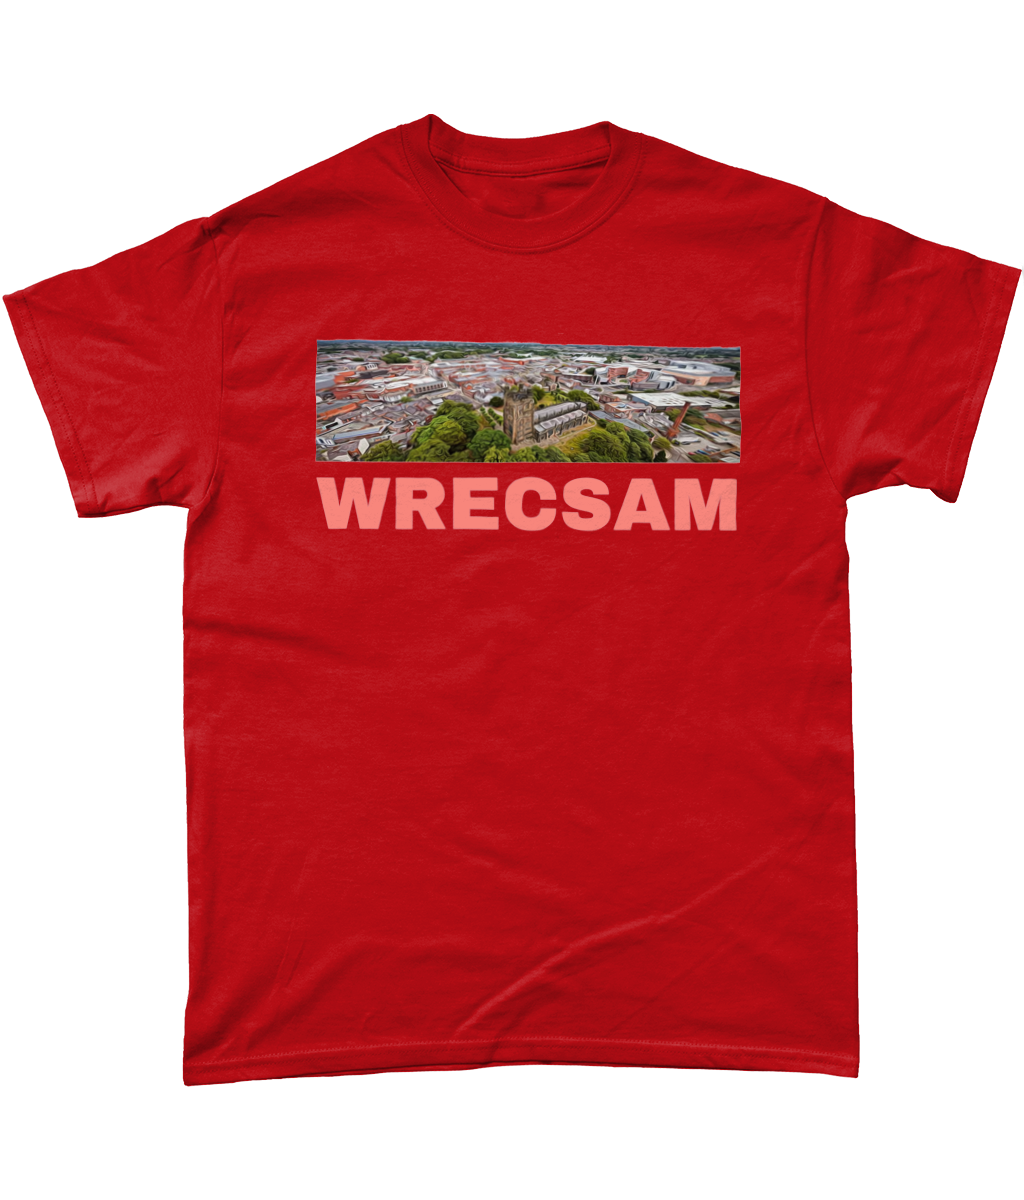 WRECSAM - Crys-T